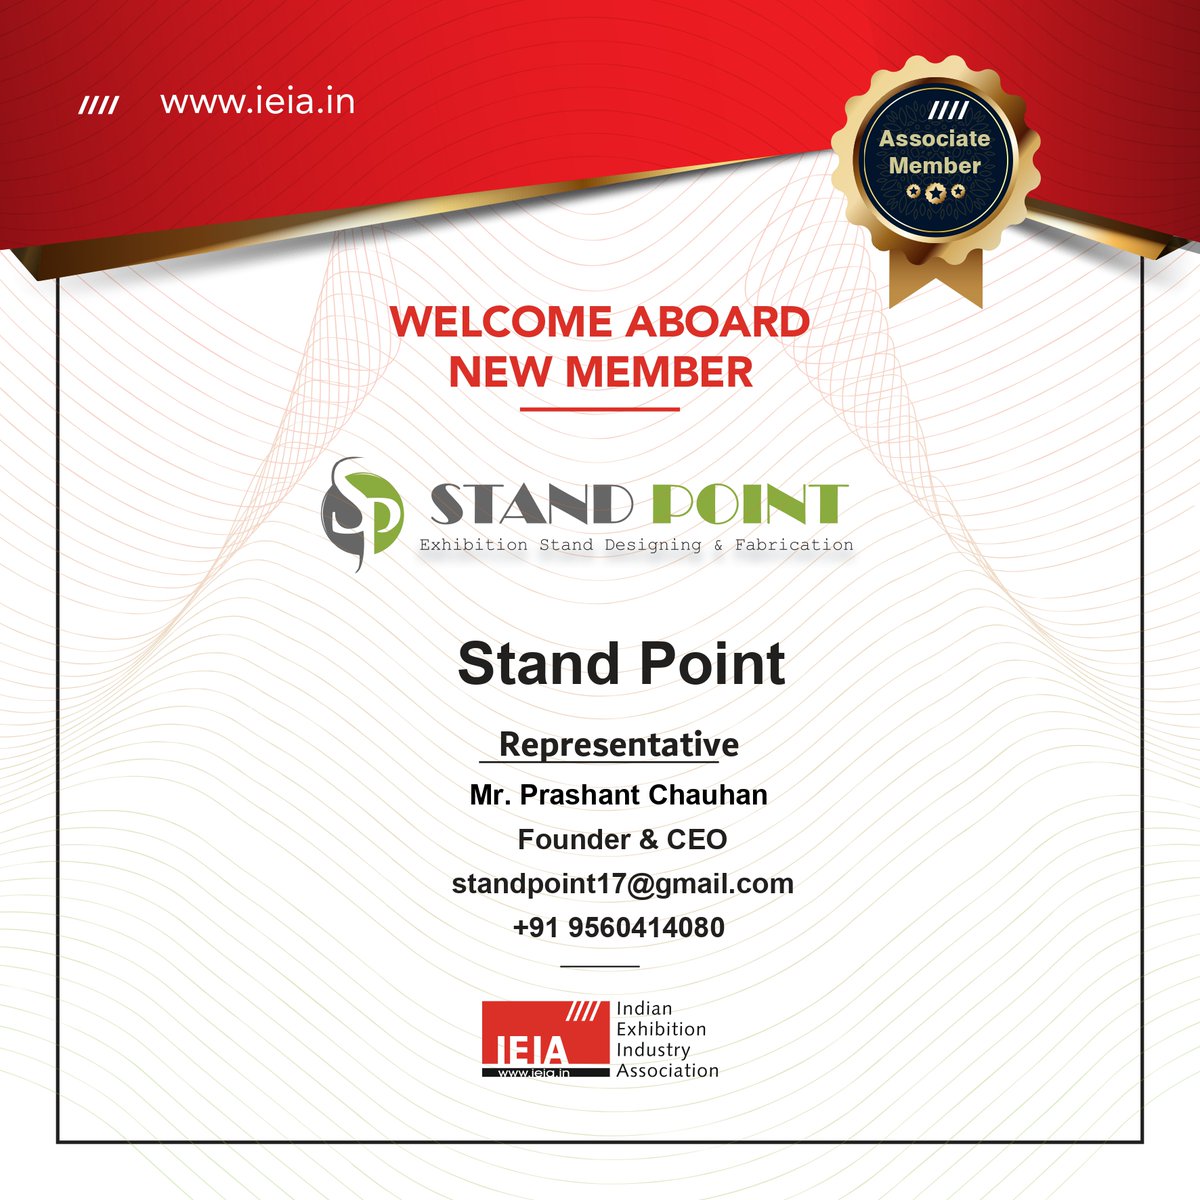 #IEIA welcomes aboard New Associate Member: Stand Point For more details: standpointexhibition.in ♦Be an IEIA member today! Join Now!! lnkd.in/gejg-Jh #StandPoint #WelcomeAboard #WelcomeAboardNewMember #IndianExhibitionIndustryAssociation #IEIA